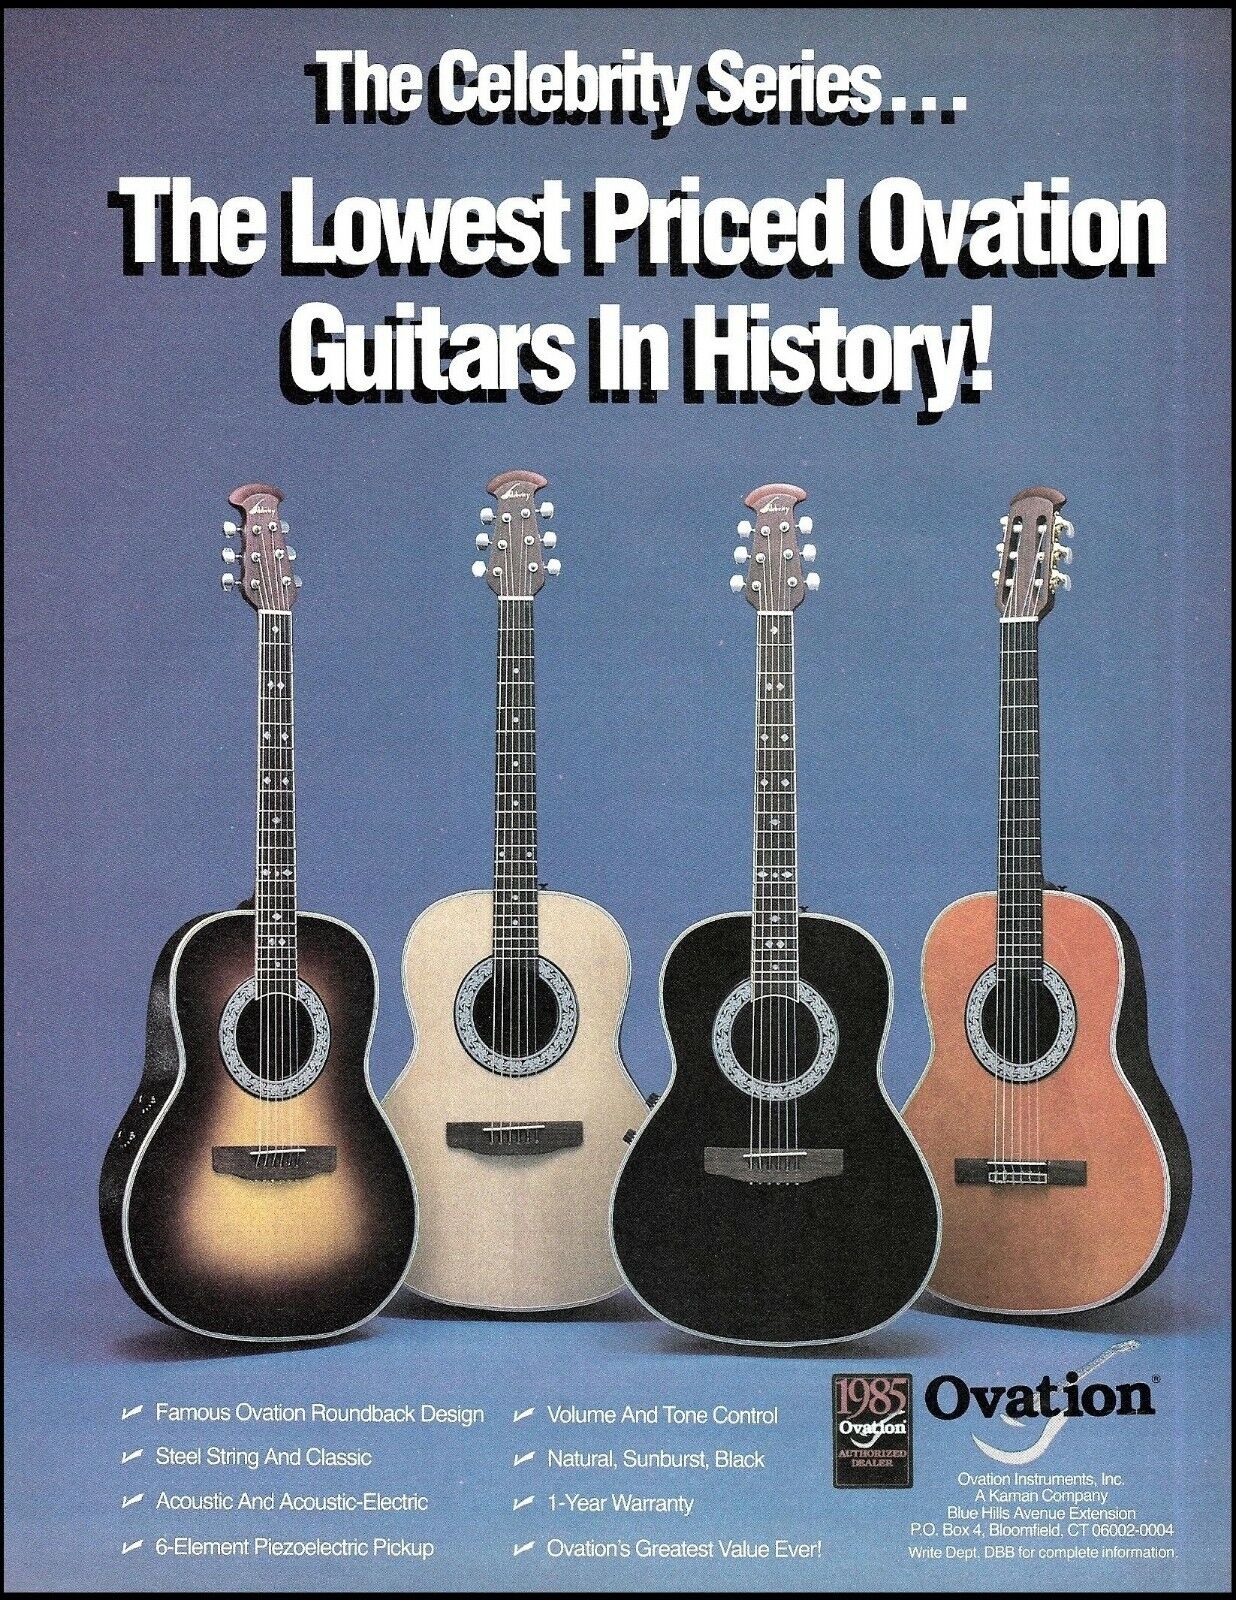 1985 Ovation Celebrity Series acoustic guitar advertisement 8 x 11 ad print